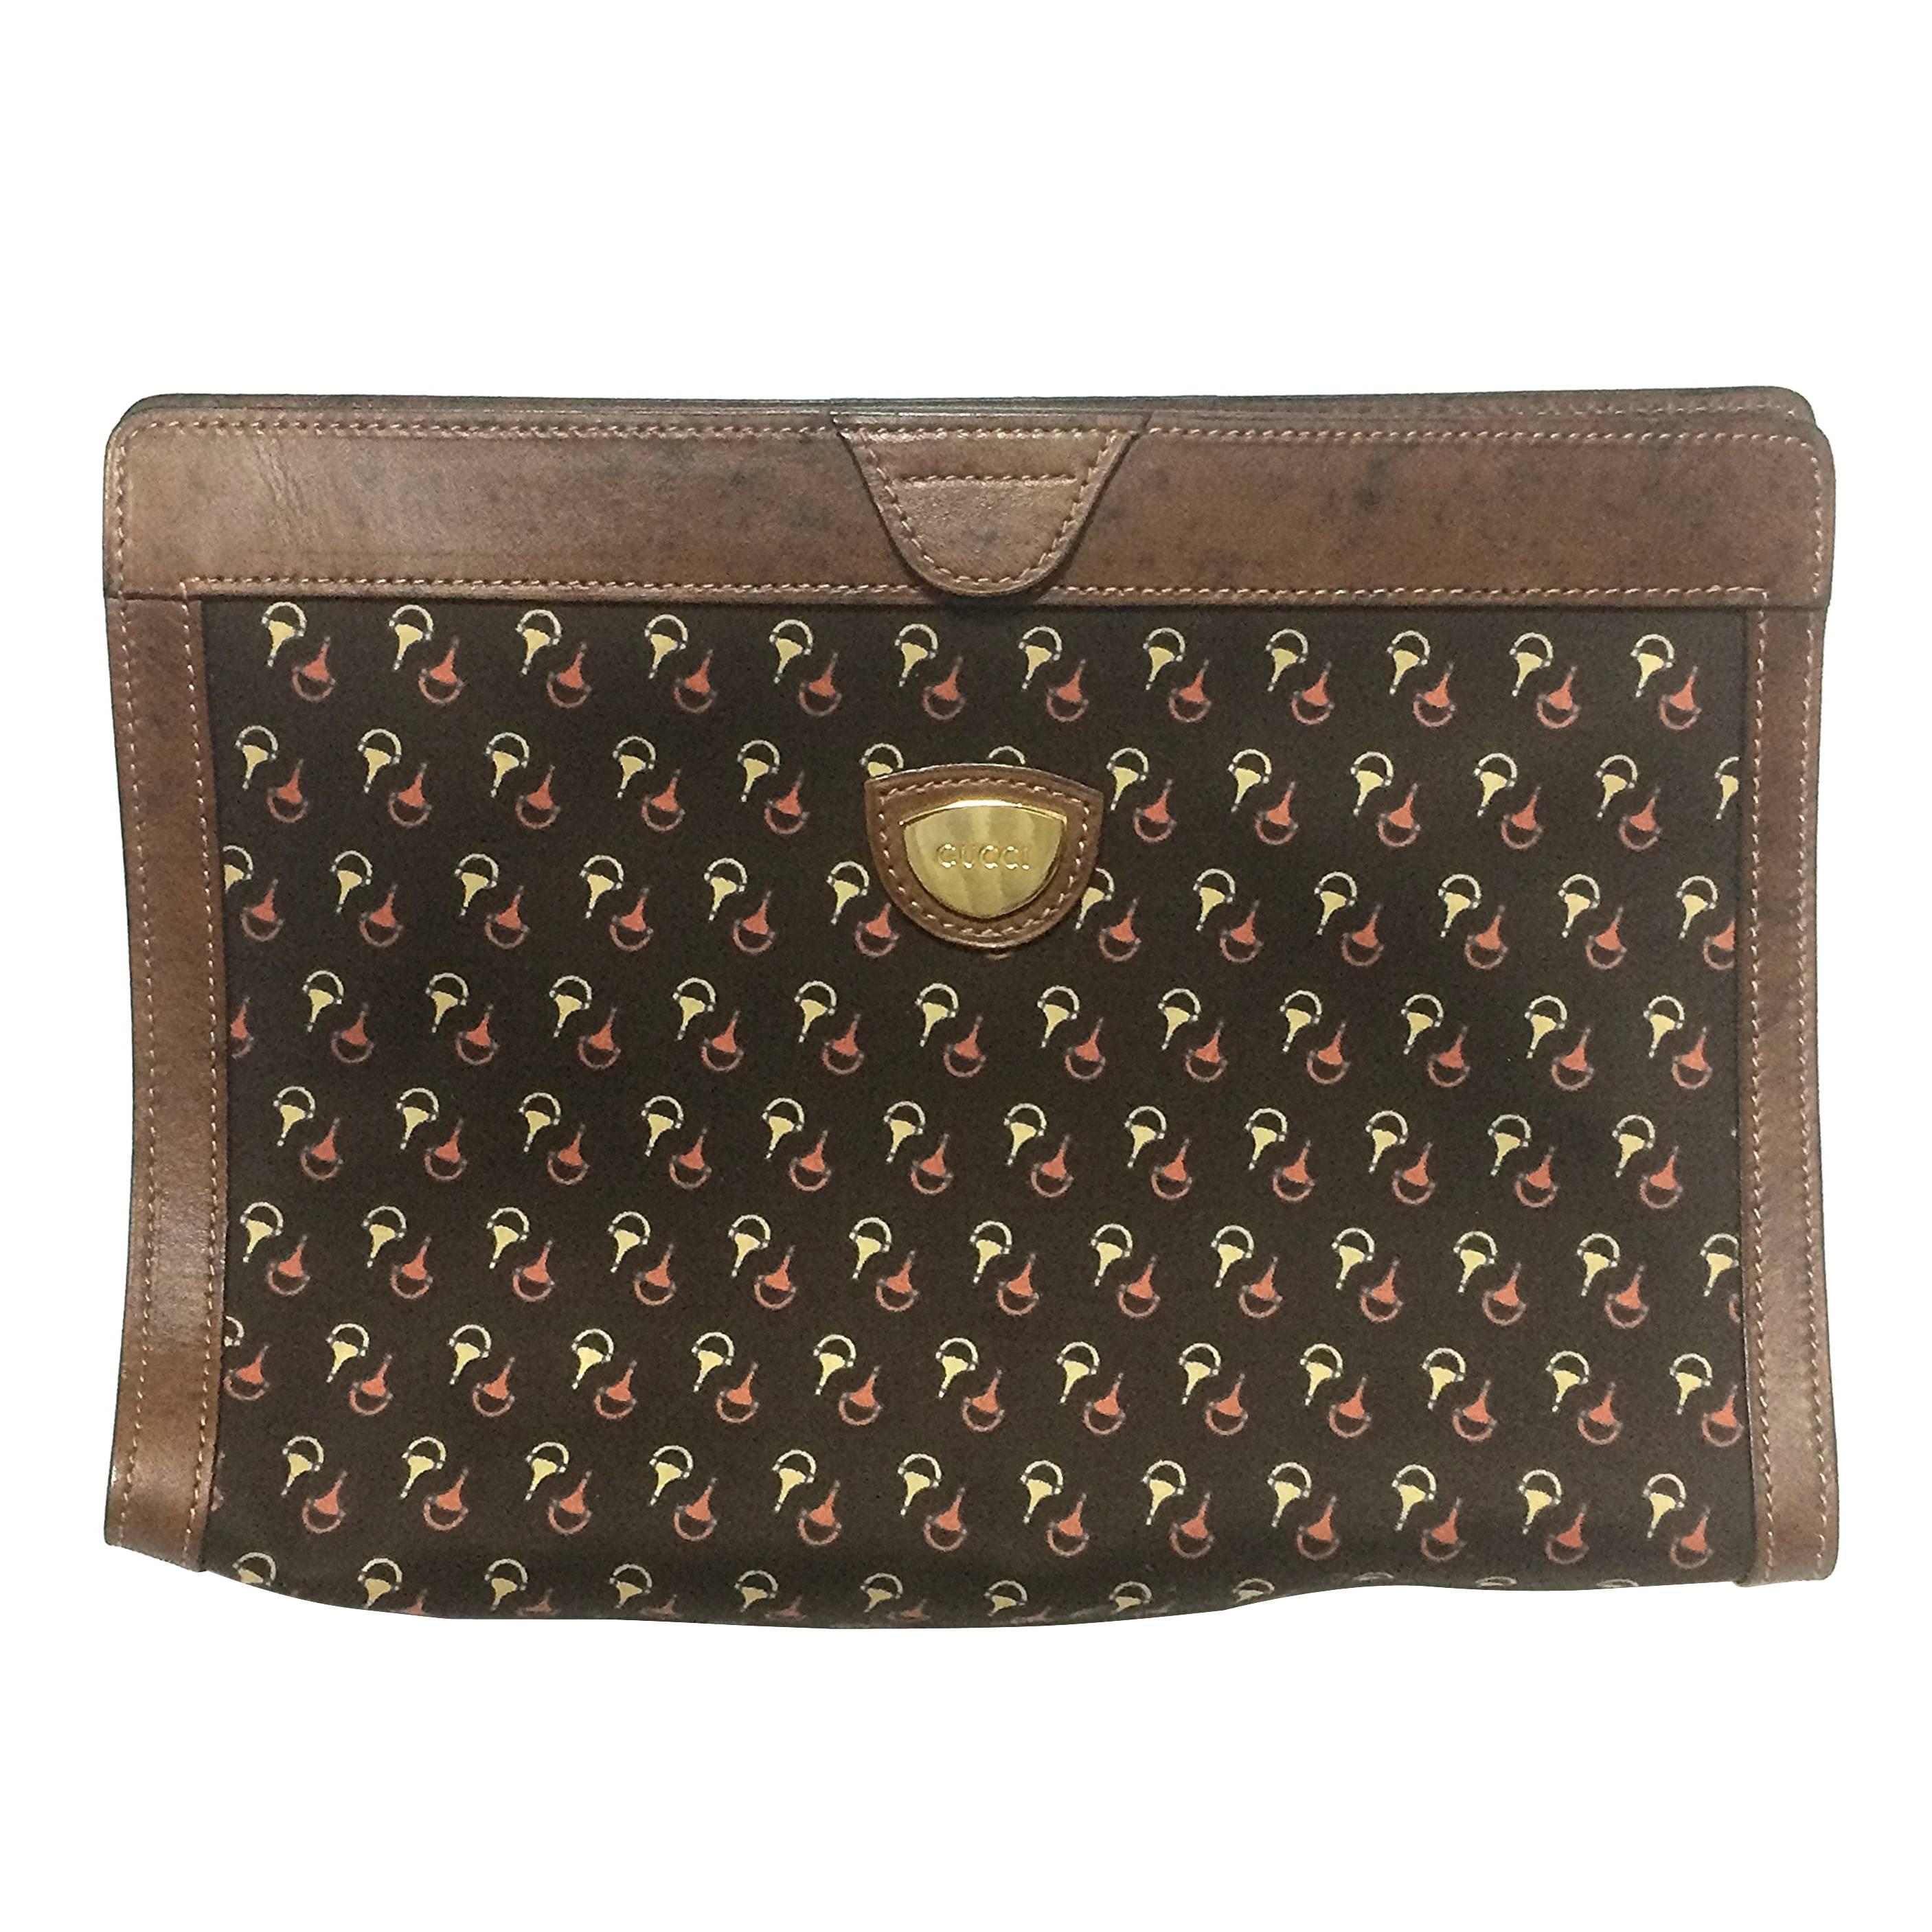 Vintage Gucci brown toiletry clutch pouch with all over horsebit print